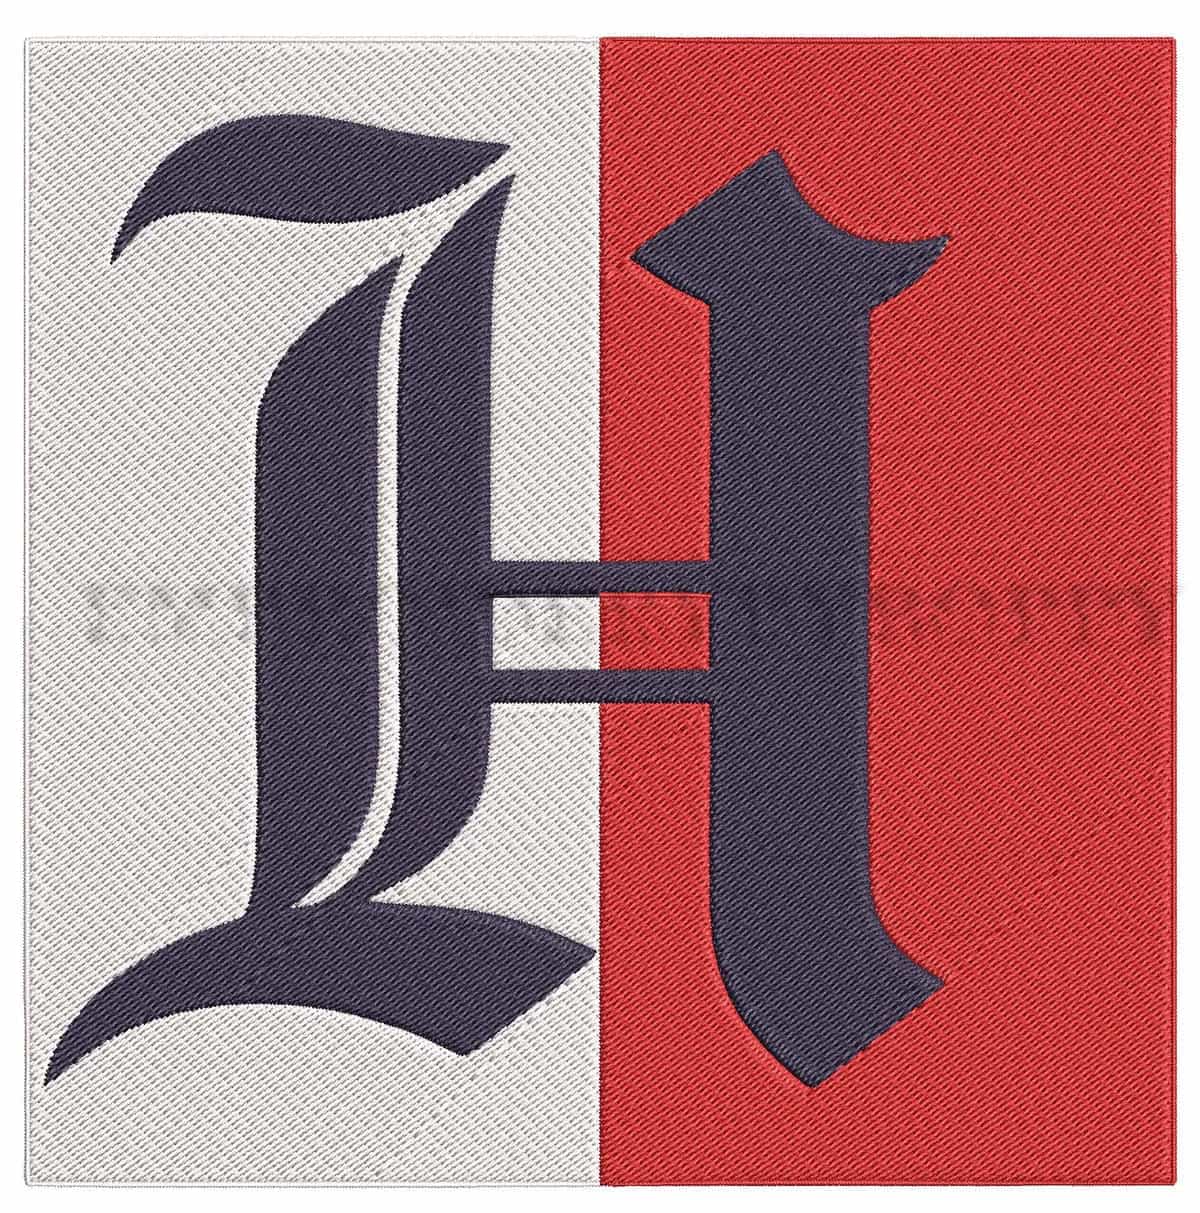 Tommy Hilfiger Lewis H.- 2 sizes- Embroidery Design FineryEmbroidery